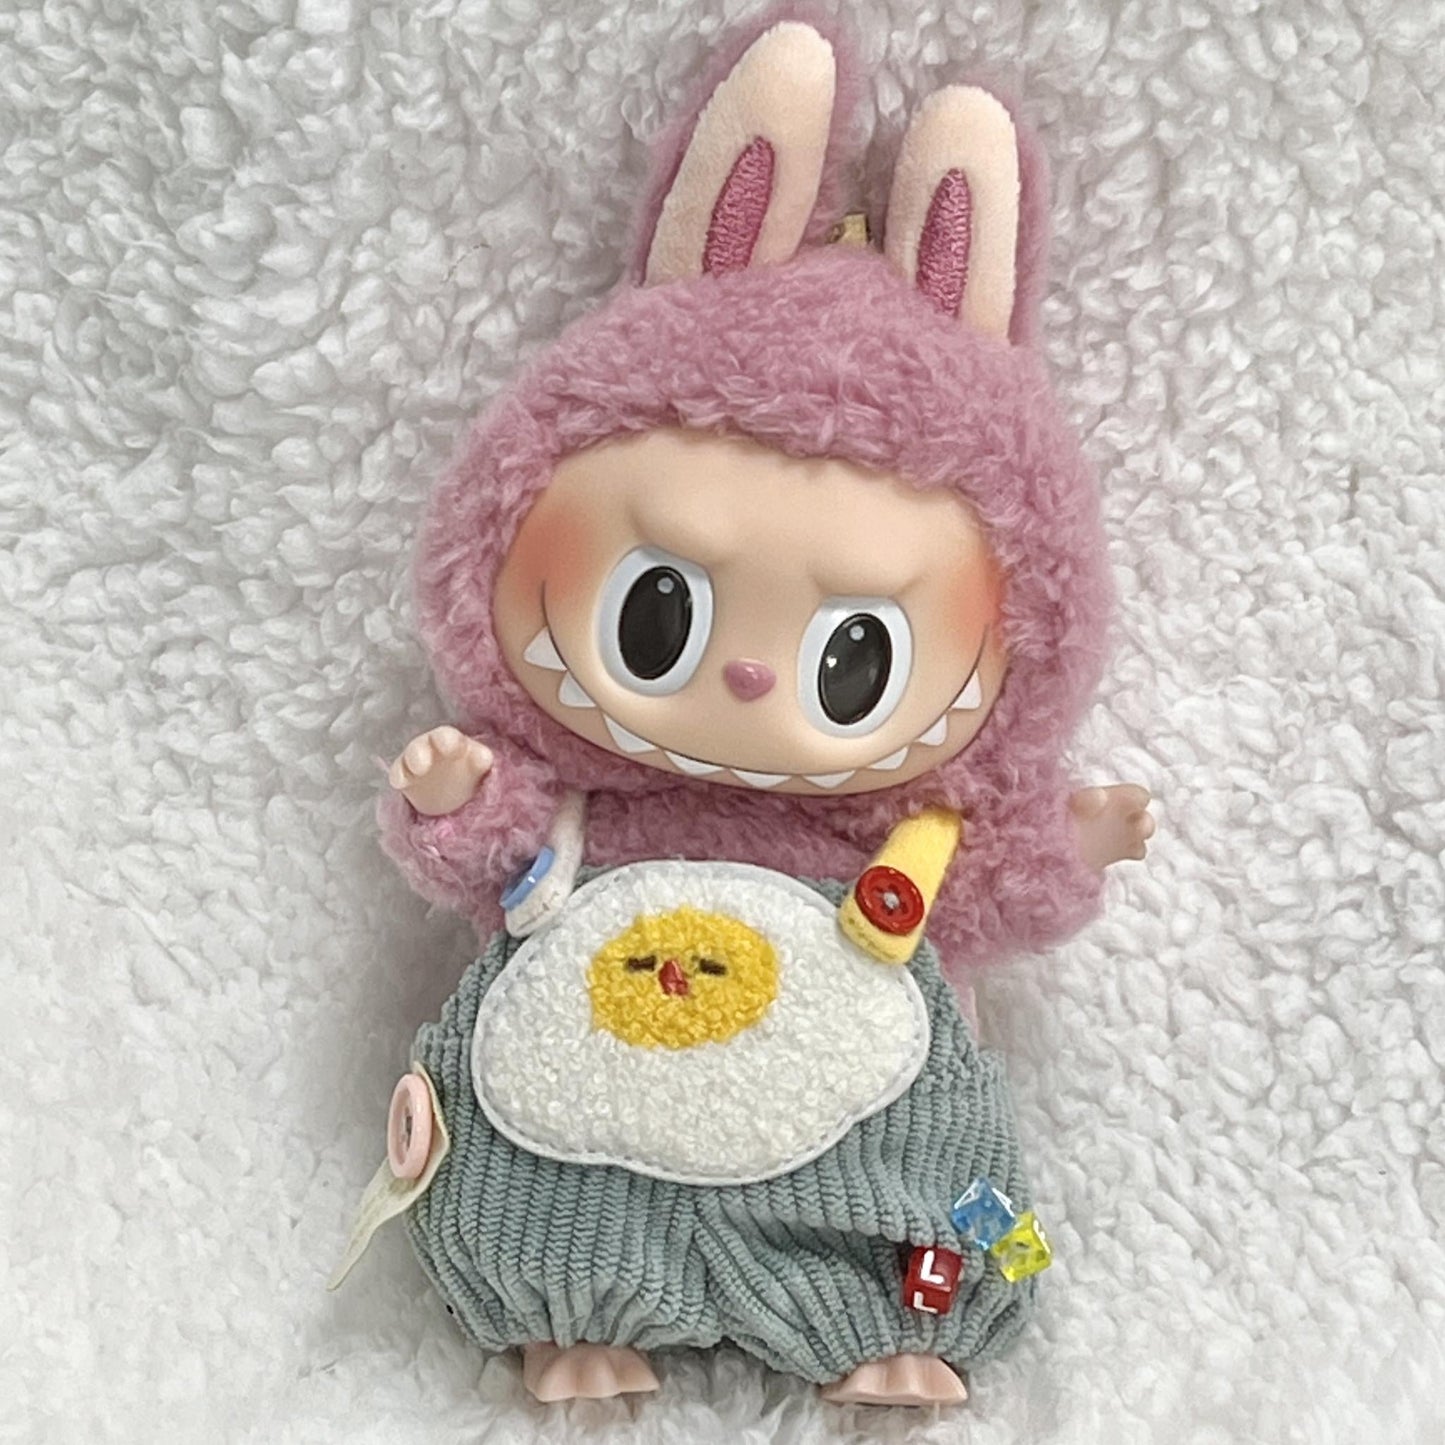 15 cm Cotton Doll Clothes Hoodie 20 cm Doll Overalls - TOY-ACC-79302 - Uchuuu Store - 42shops